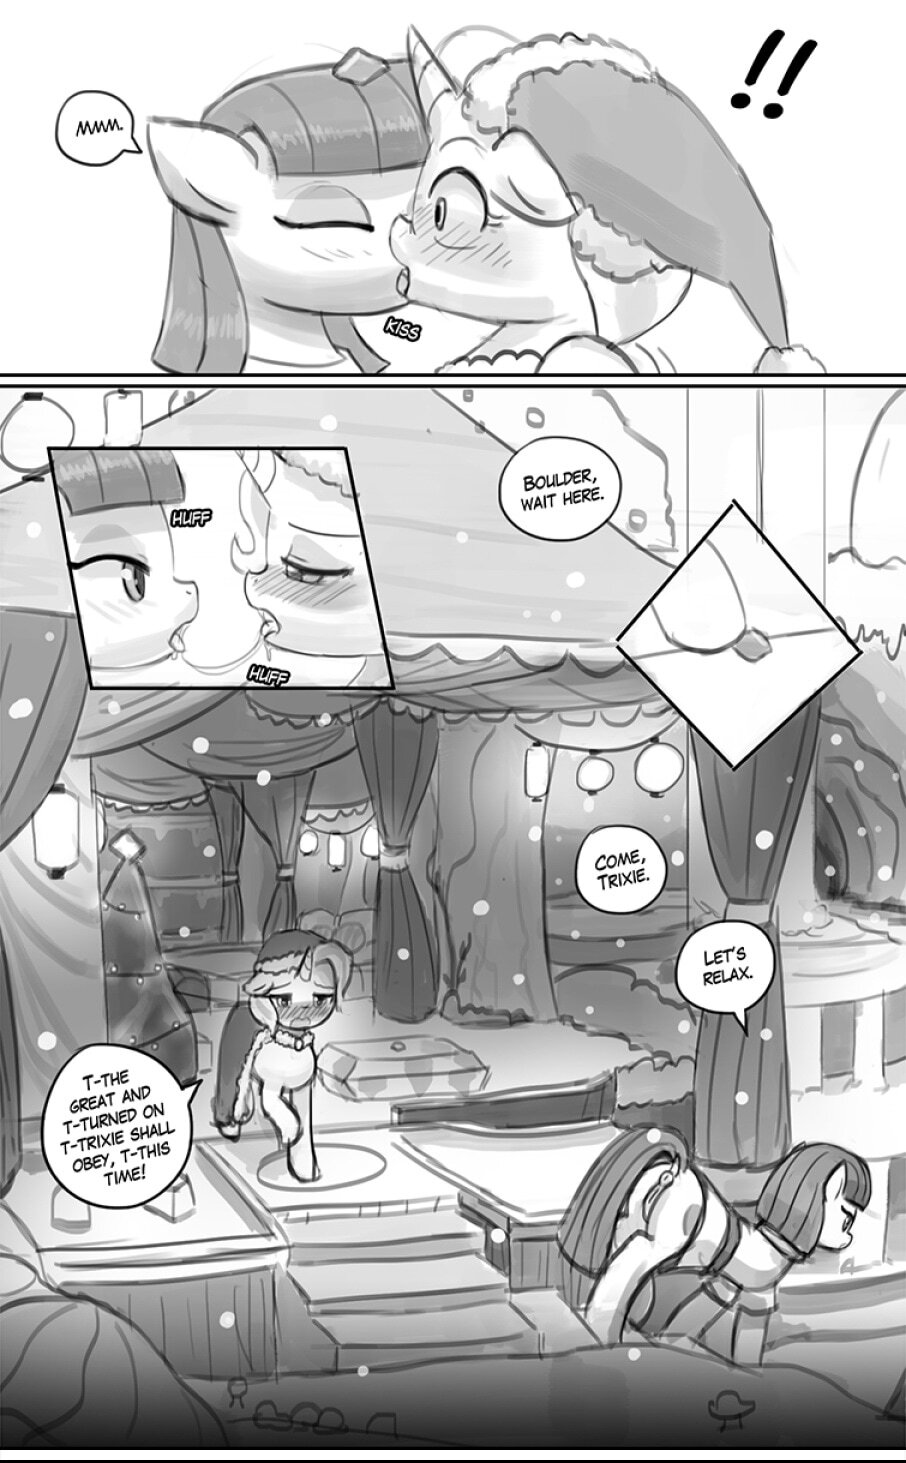 Homesick Part 2: Hearth's Warming Eve - Page 9